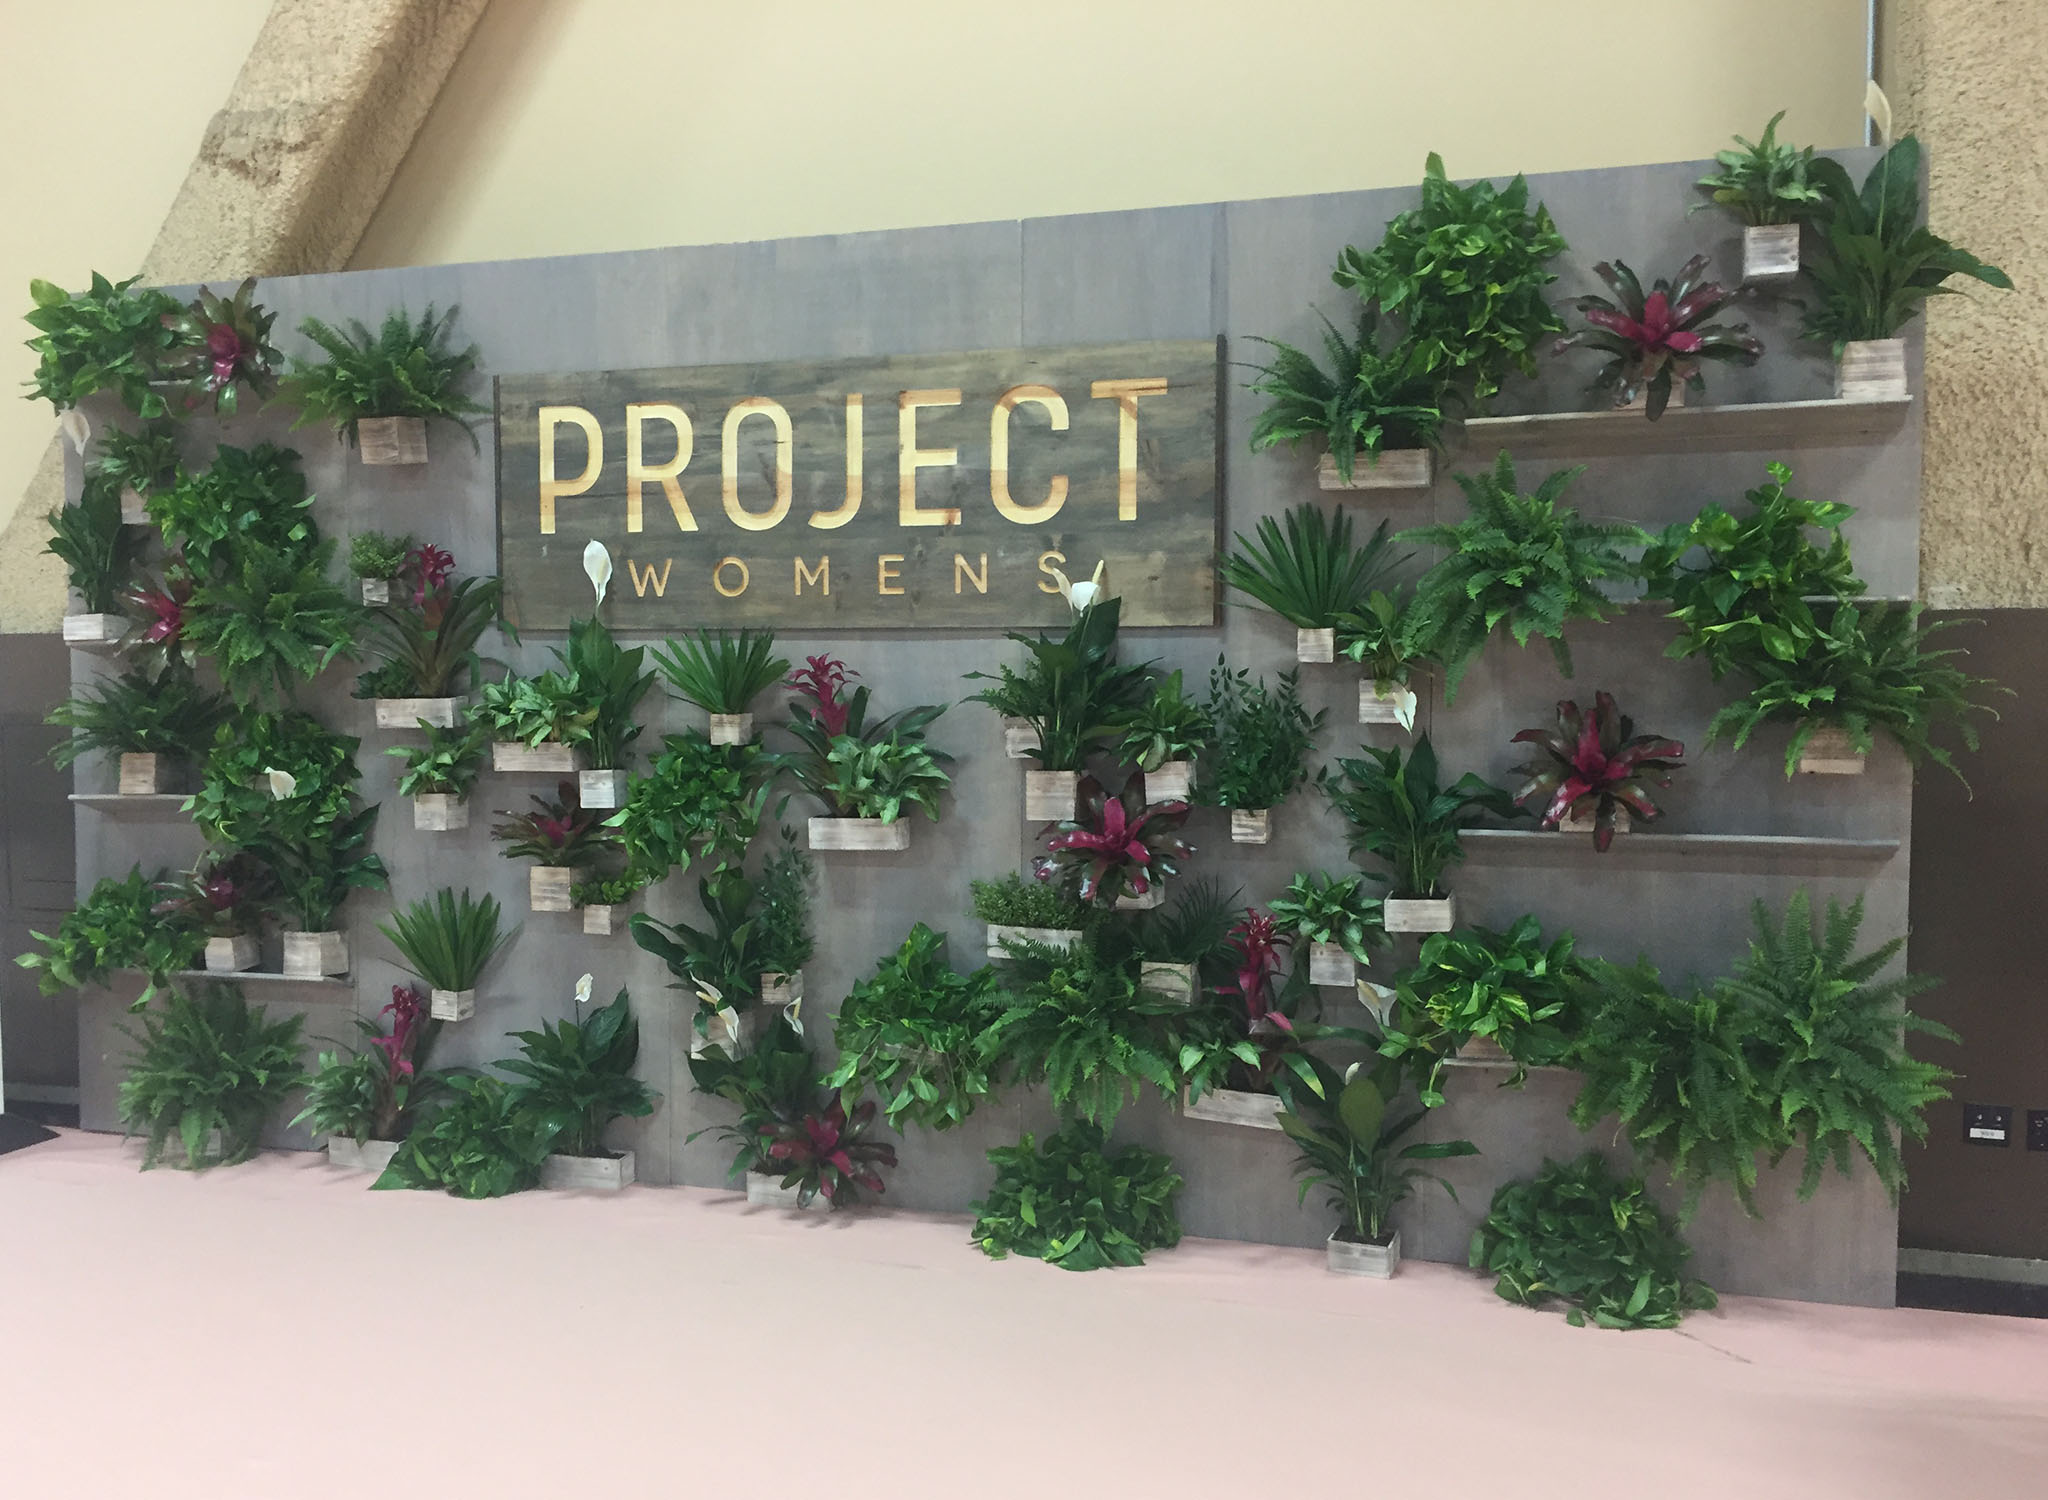 Project Living wall at trade show decorated with plants.